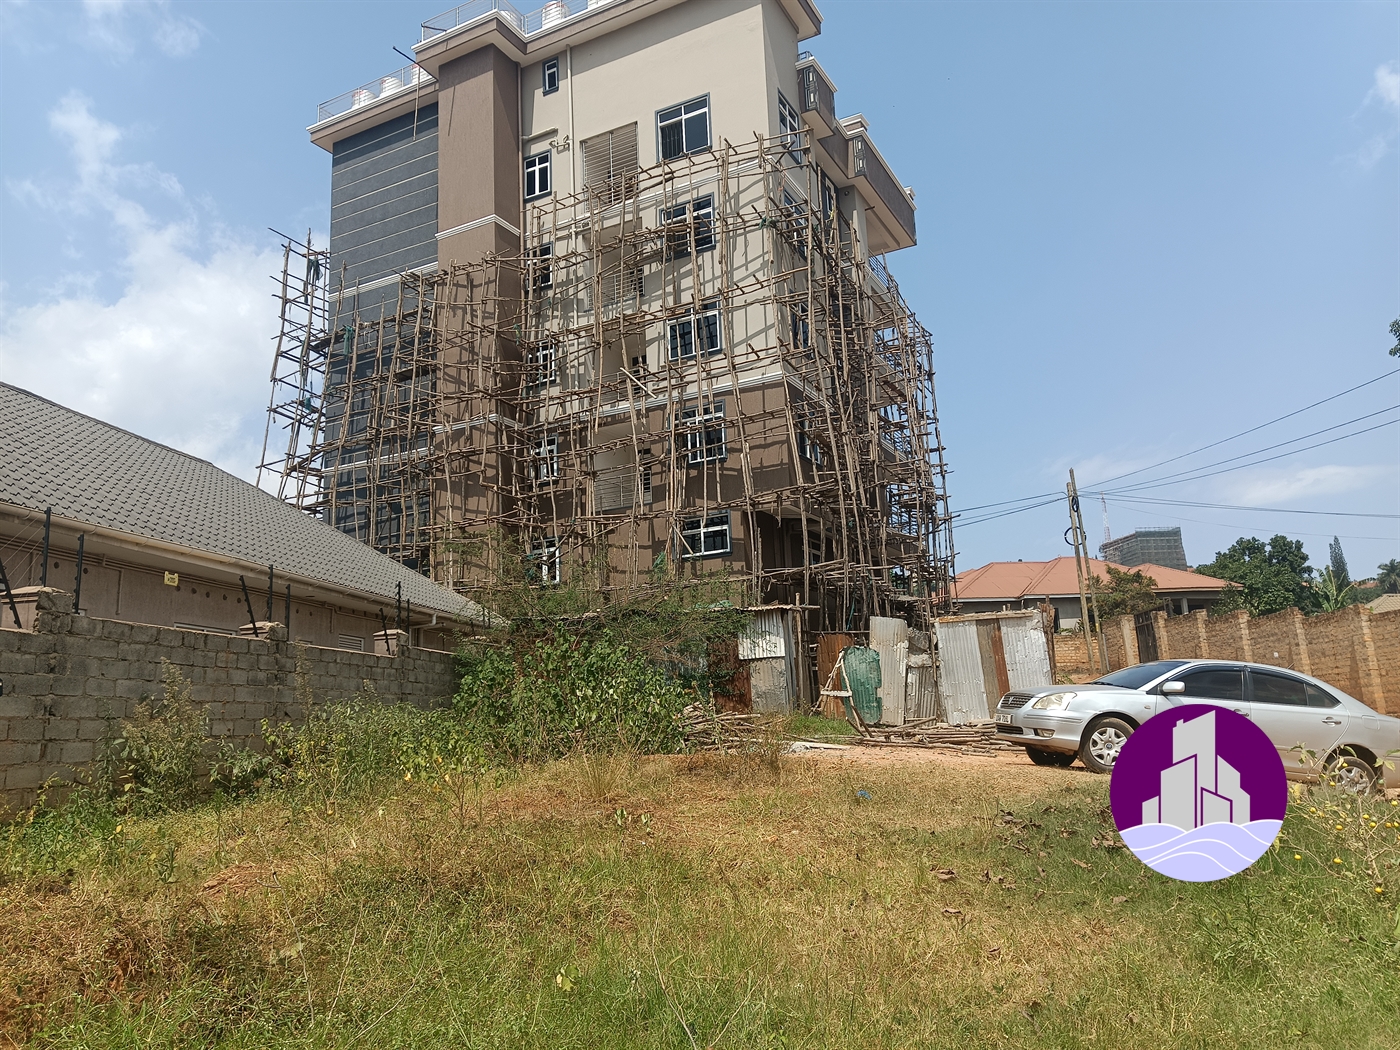 Residential Land for sale in Kisaasi Kampala